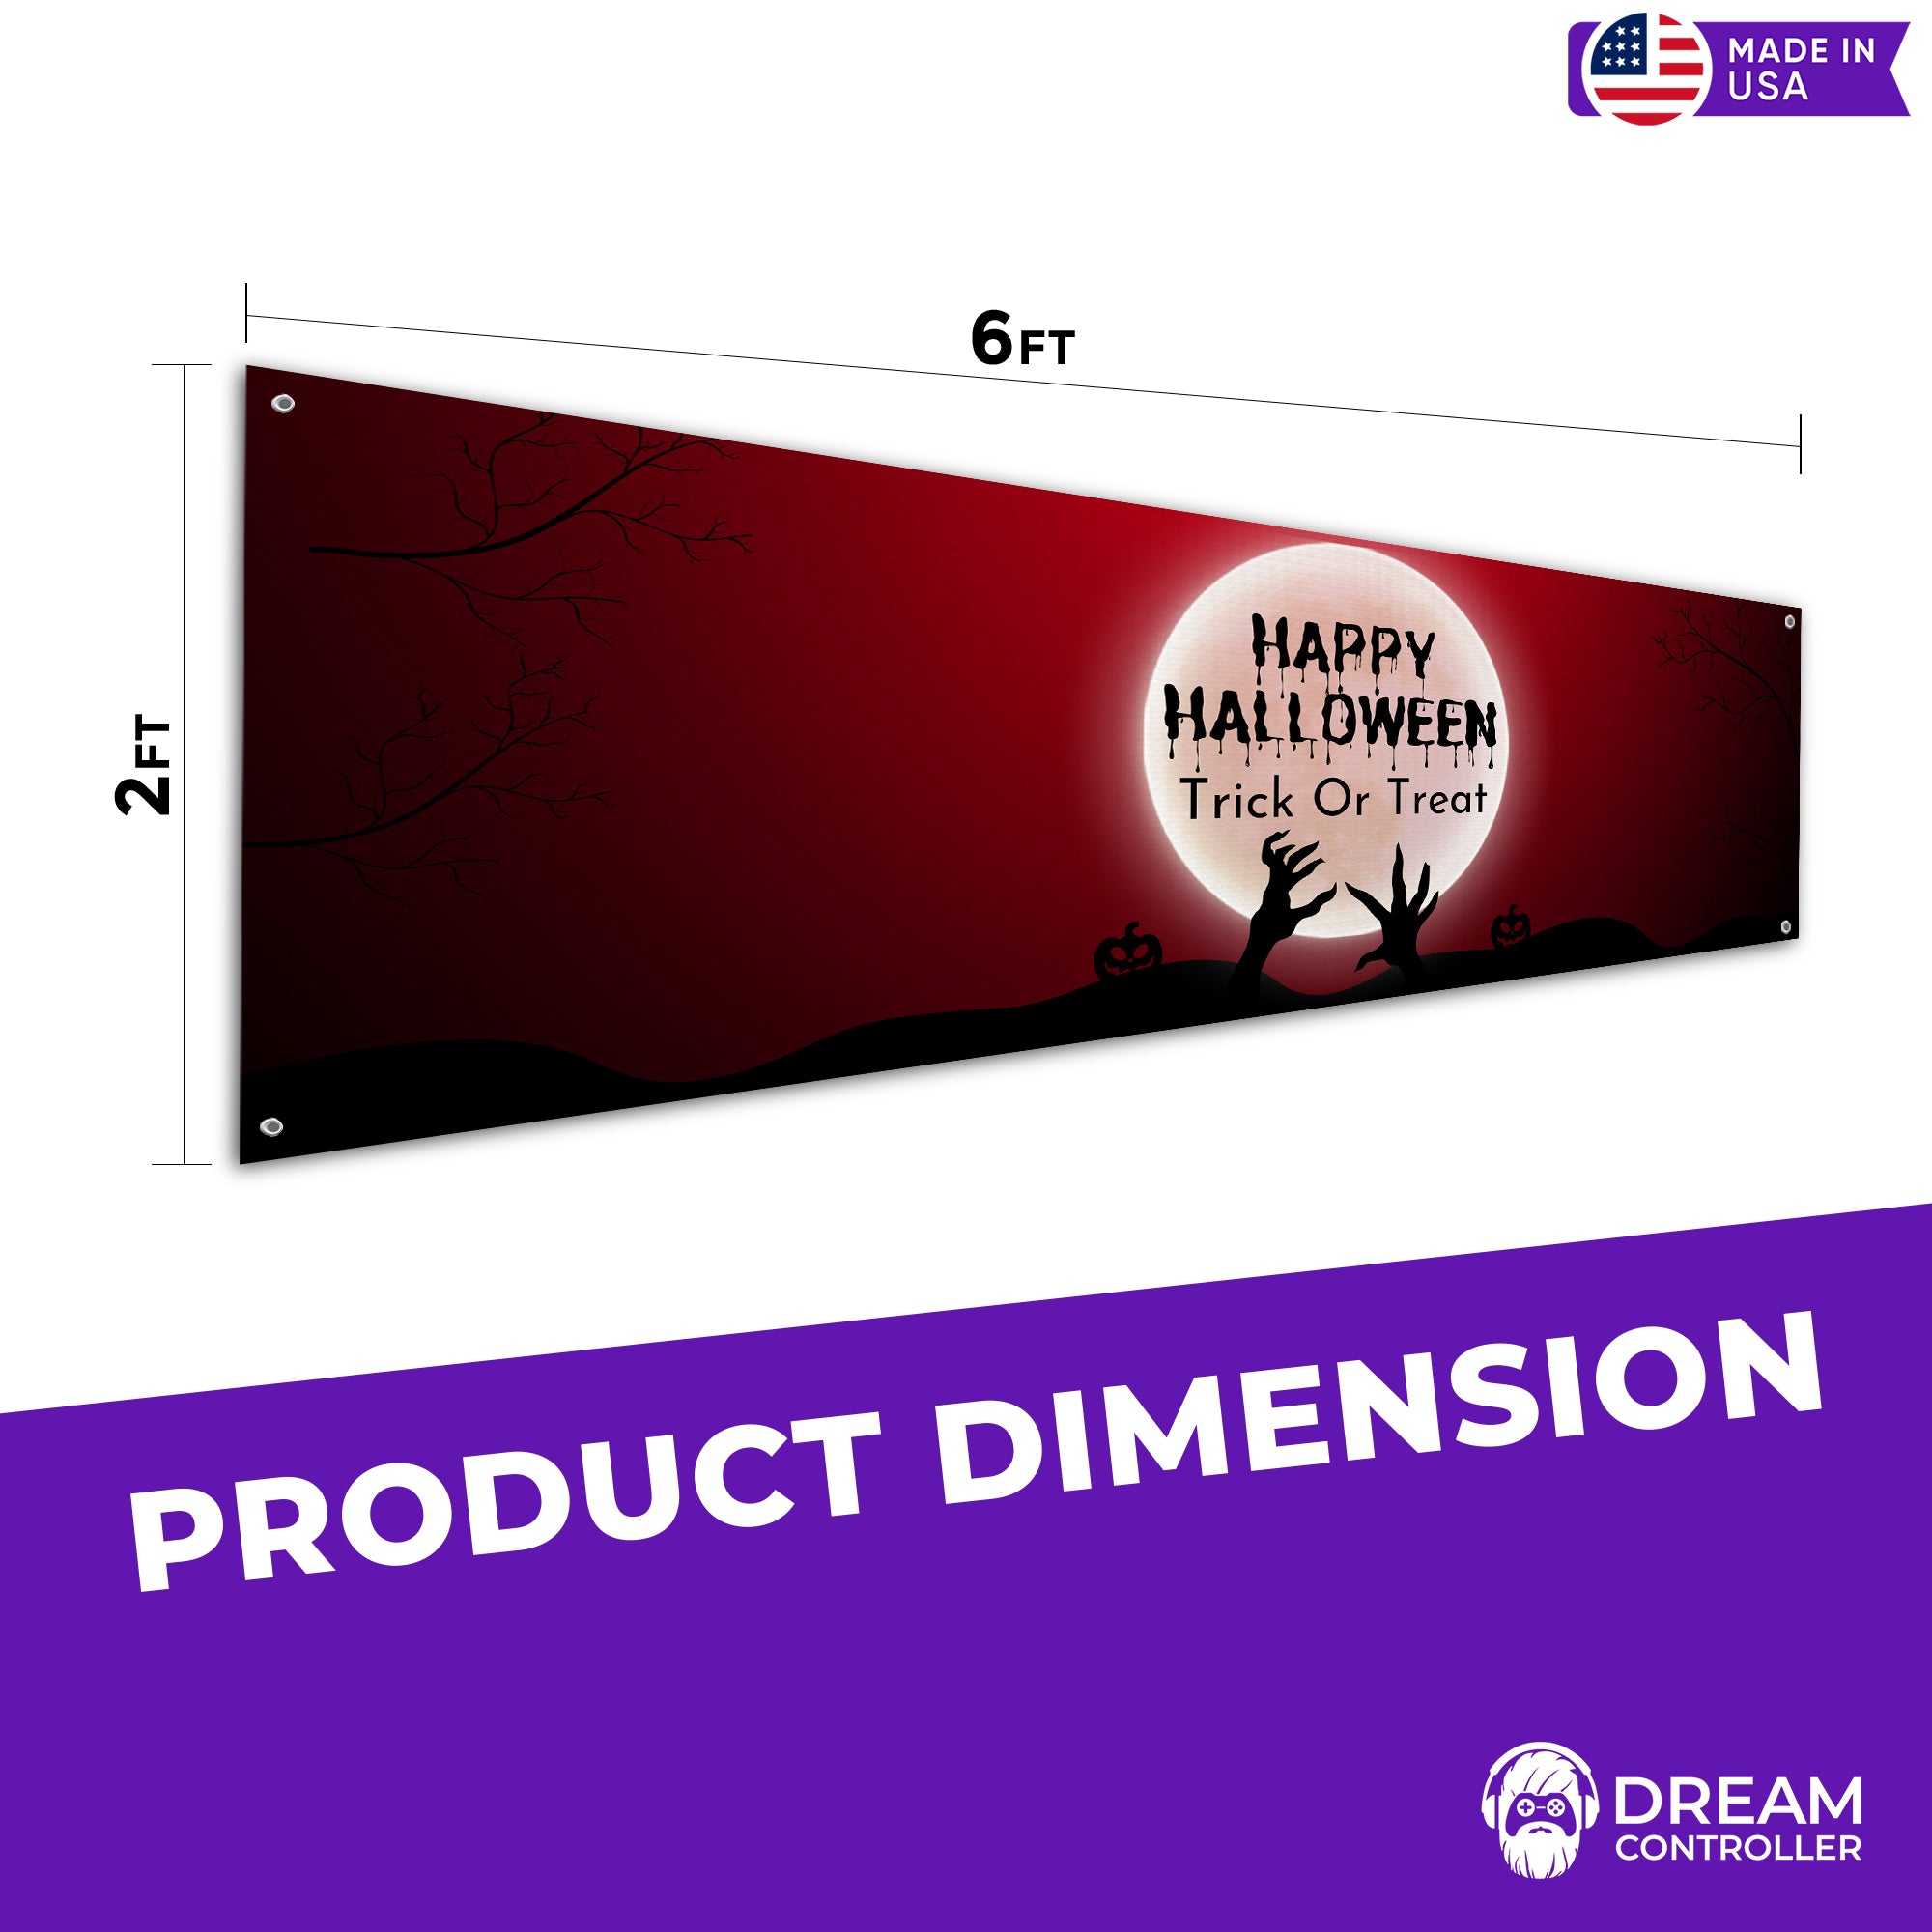 Happy Halloween Trick or Treat Banner: Unearth Size Options, Quality Textile